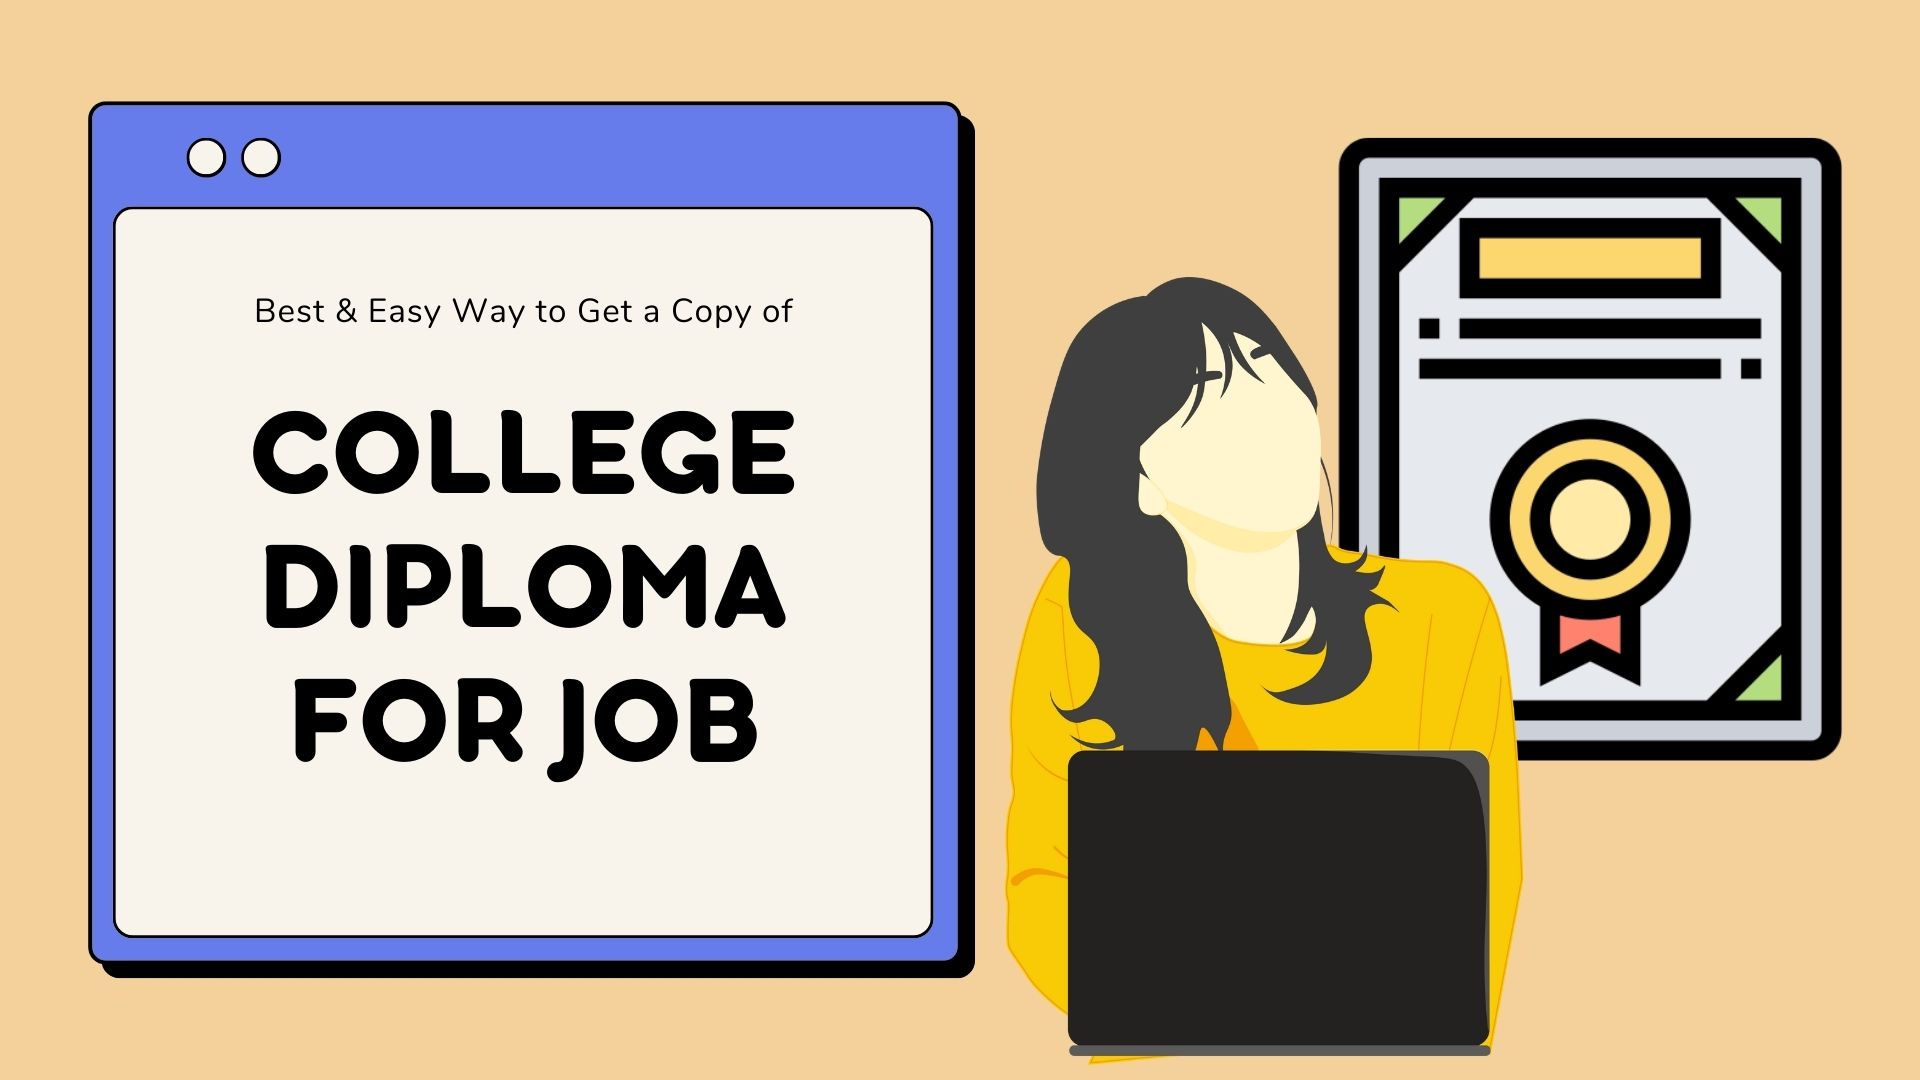 cartoon of graduate next to diploma holding briefcase for job she is applying for